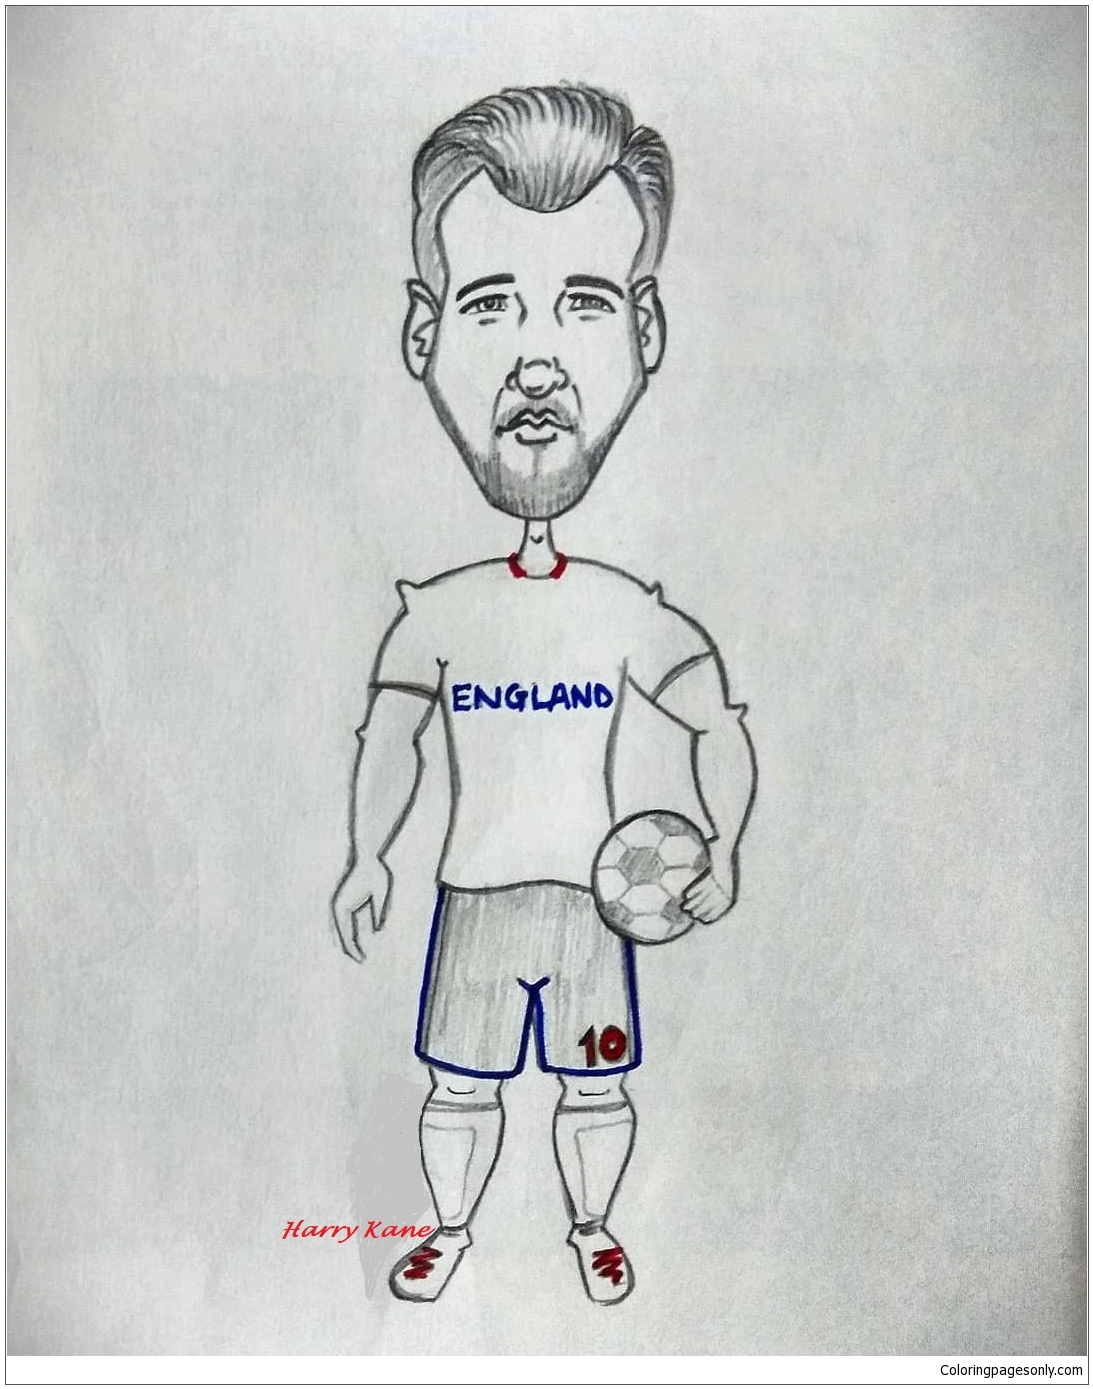 Harry Kane-image 8 Coloring Page